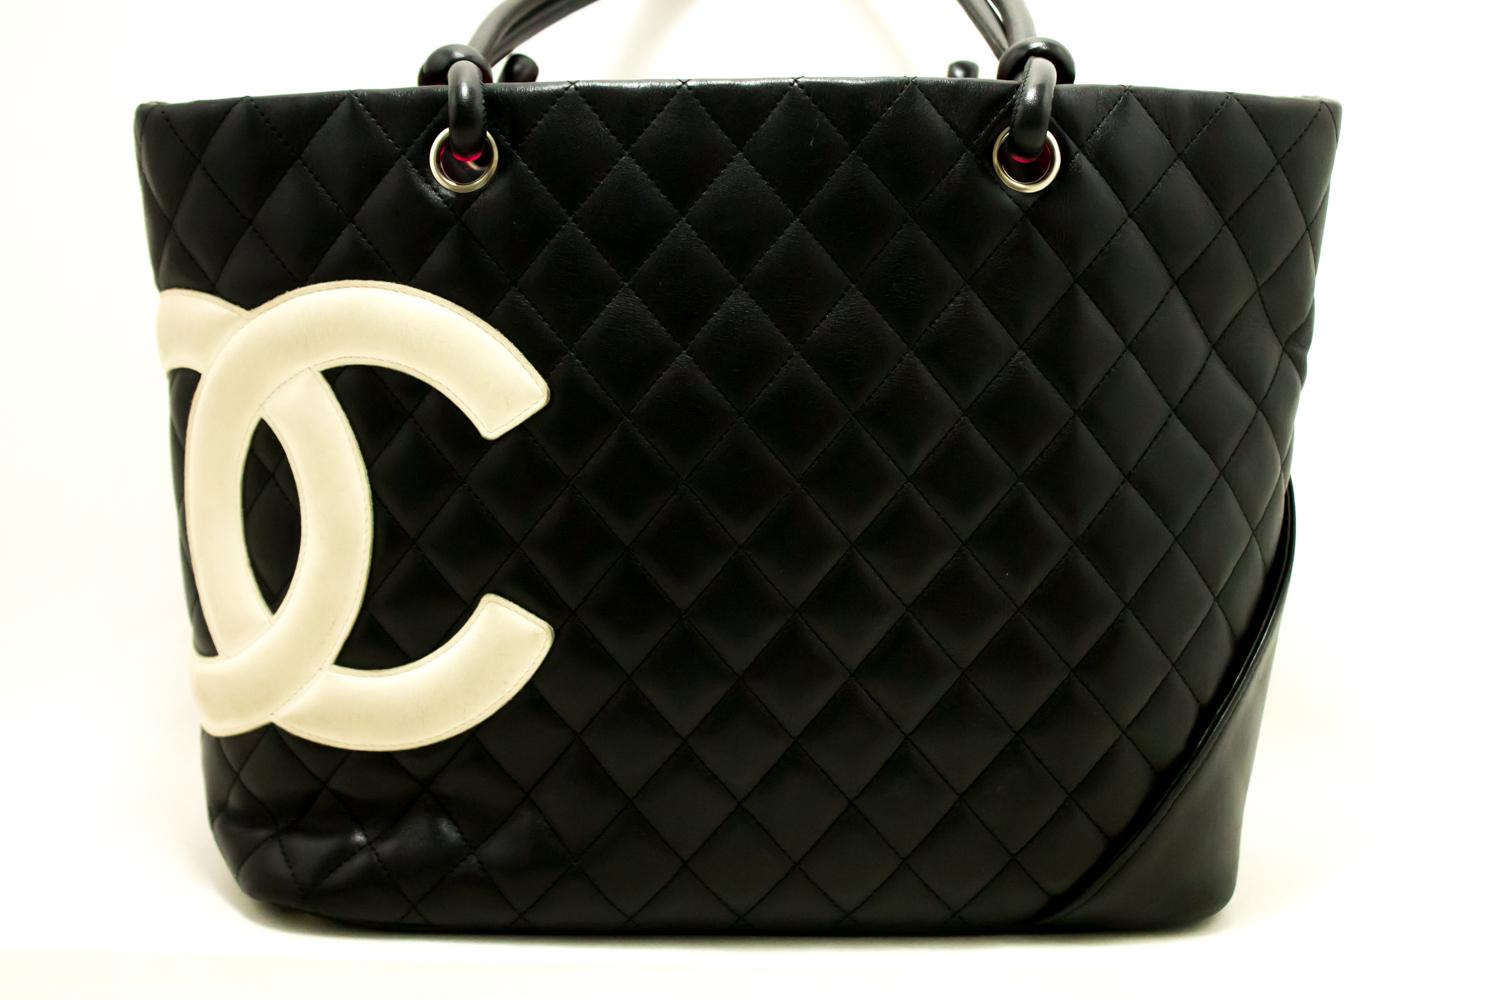 An authentic Chanel Cambon Ligne Tote Large Shoulder Bag Black White Quilted Calfskin. The color is Black. The outside material is Leather. The pattern is Solid.
Conditions & Ratings
Outside material: Calfskin
Color: Black
Closure: Zipper
Hardware: